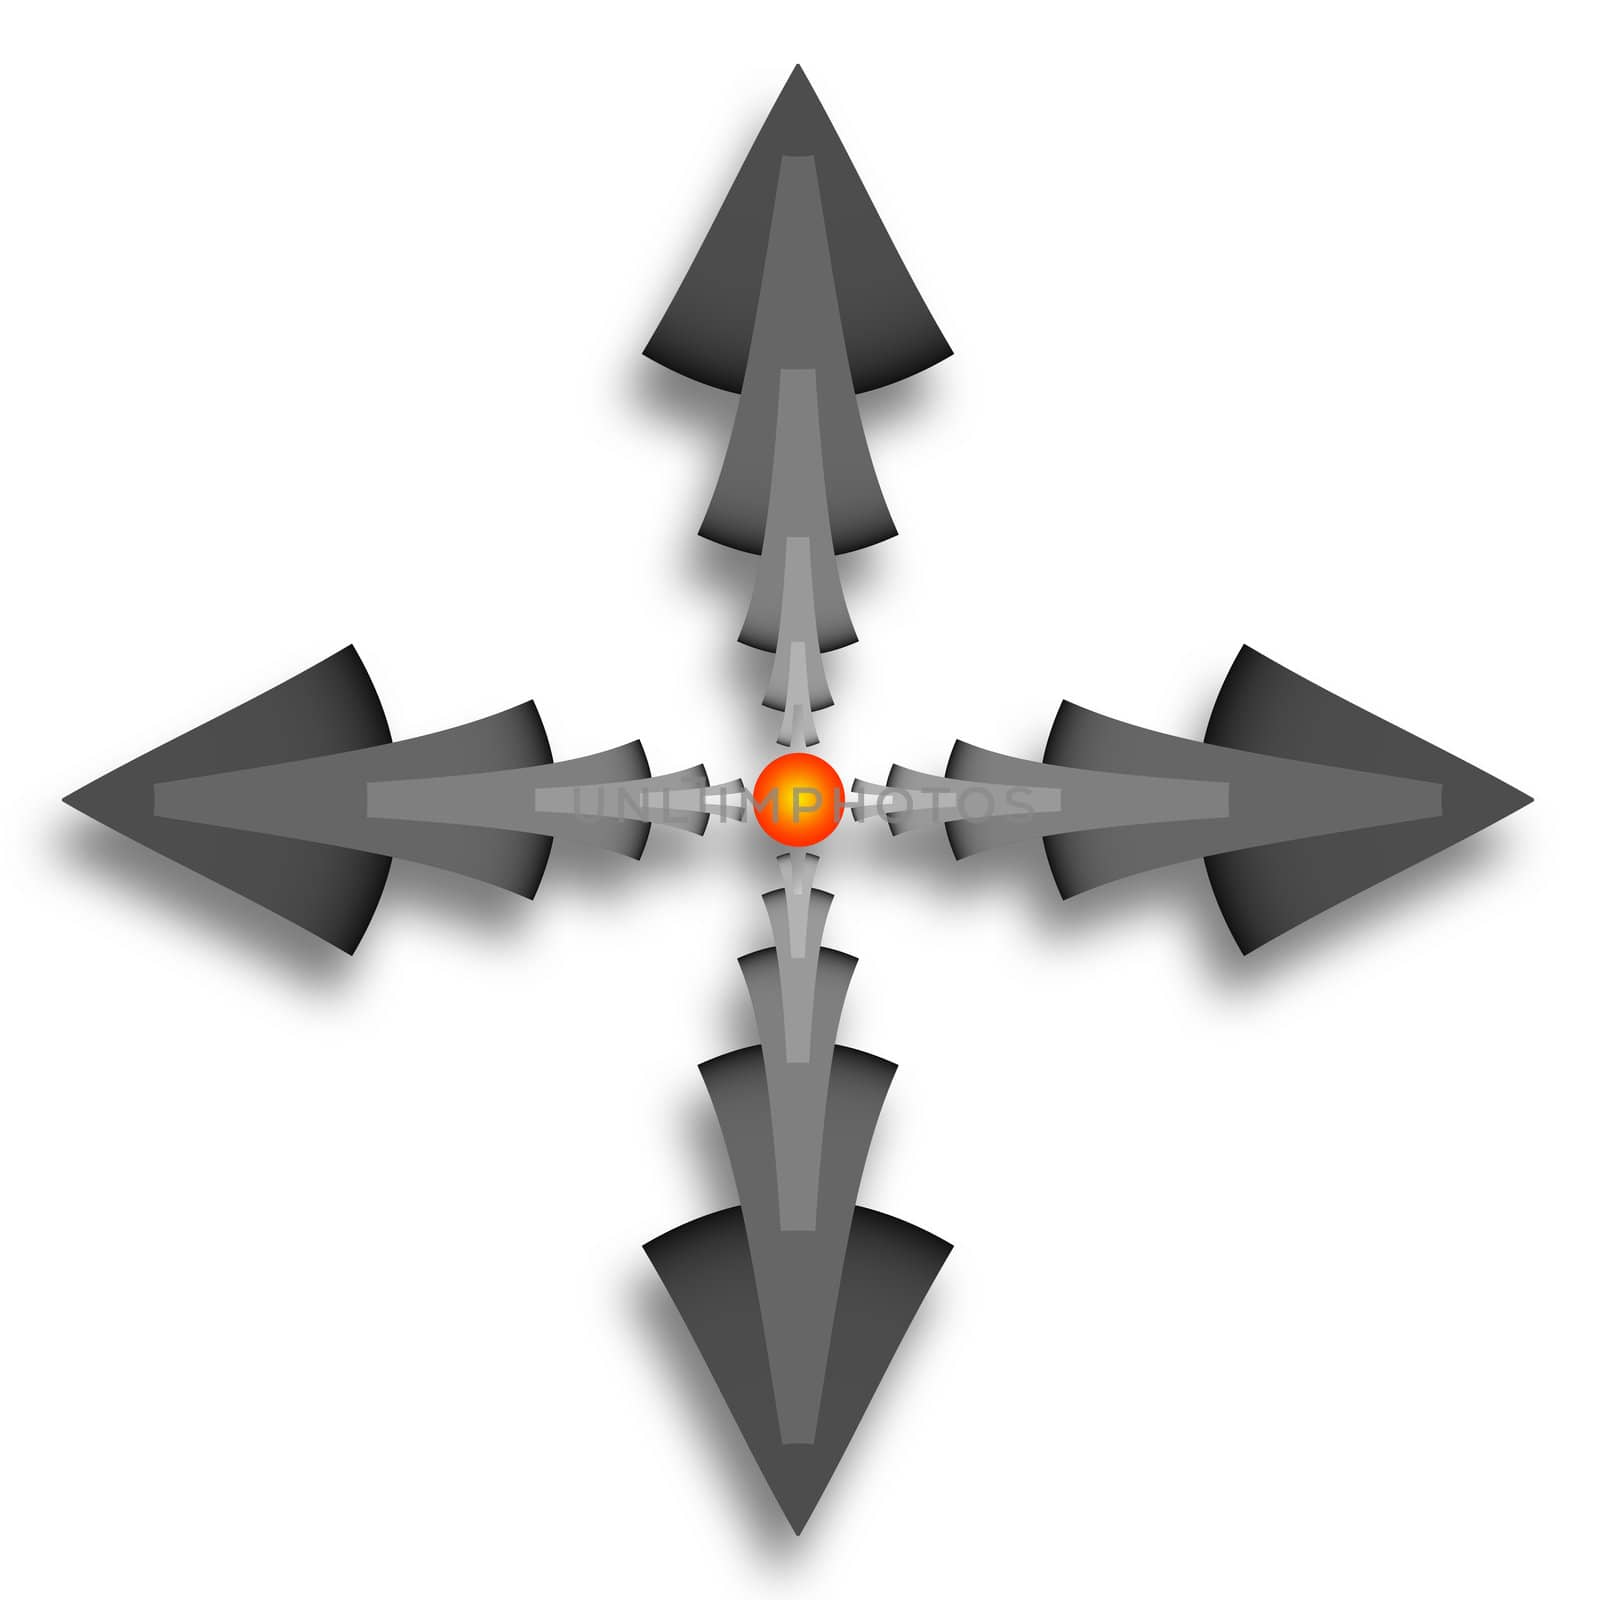 An abstract fractal illustration in the shape of gray arrows pointing out from a central core of an orange bubble.